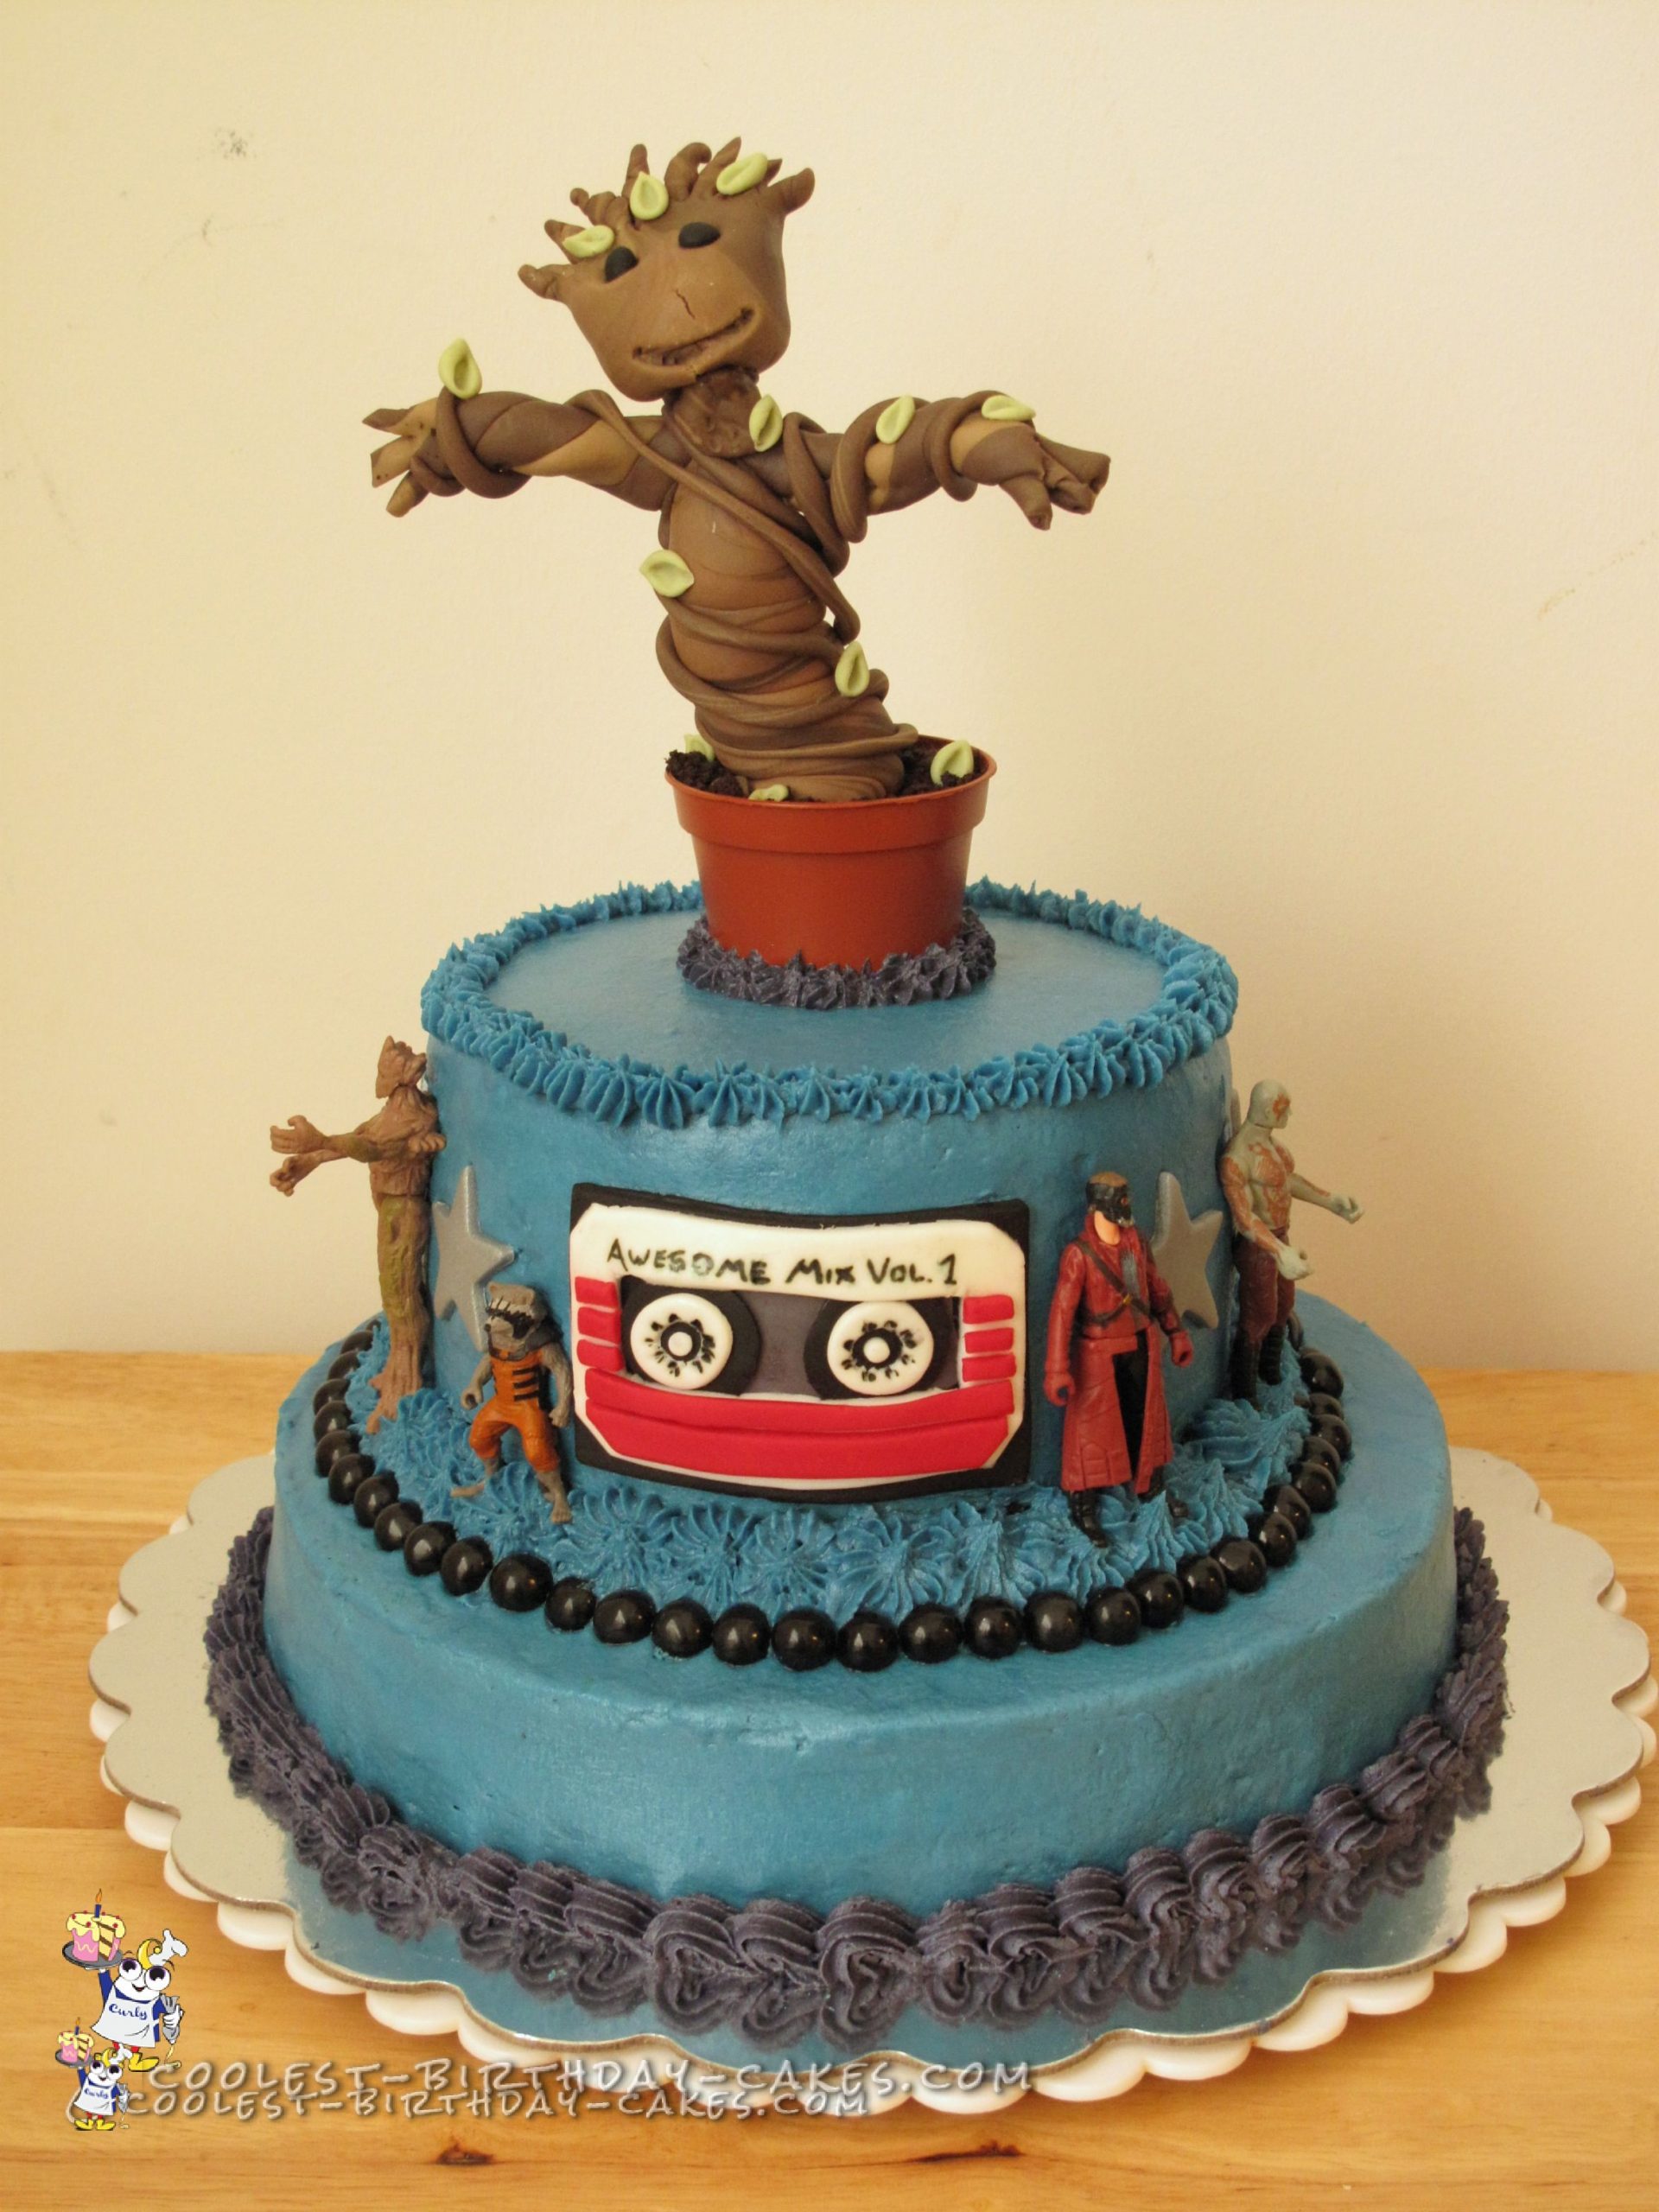 Coolest Baby Groot Cake